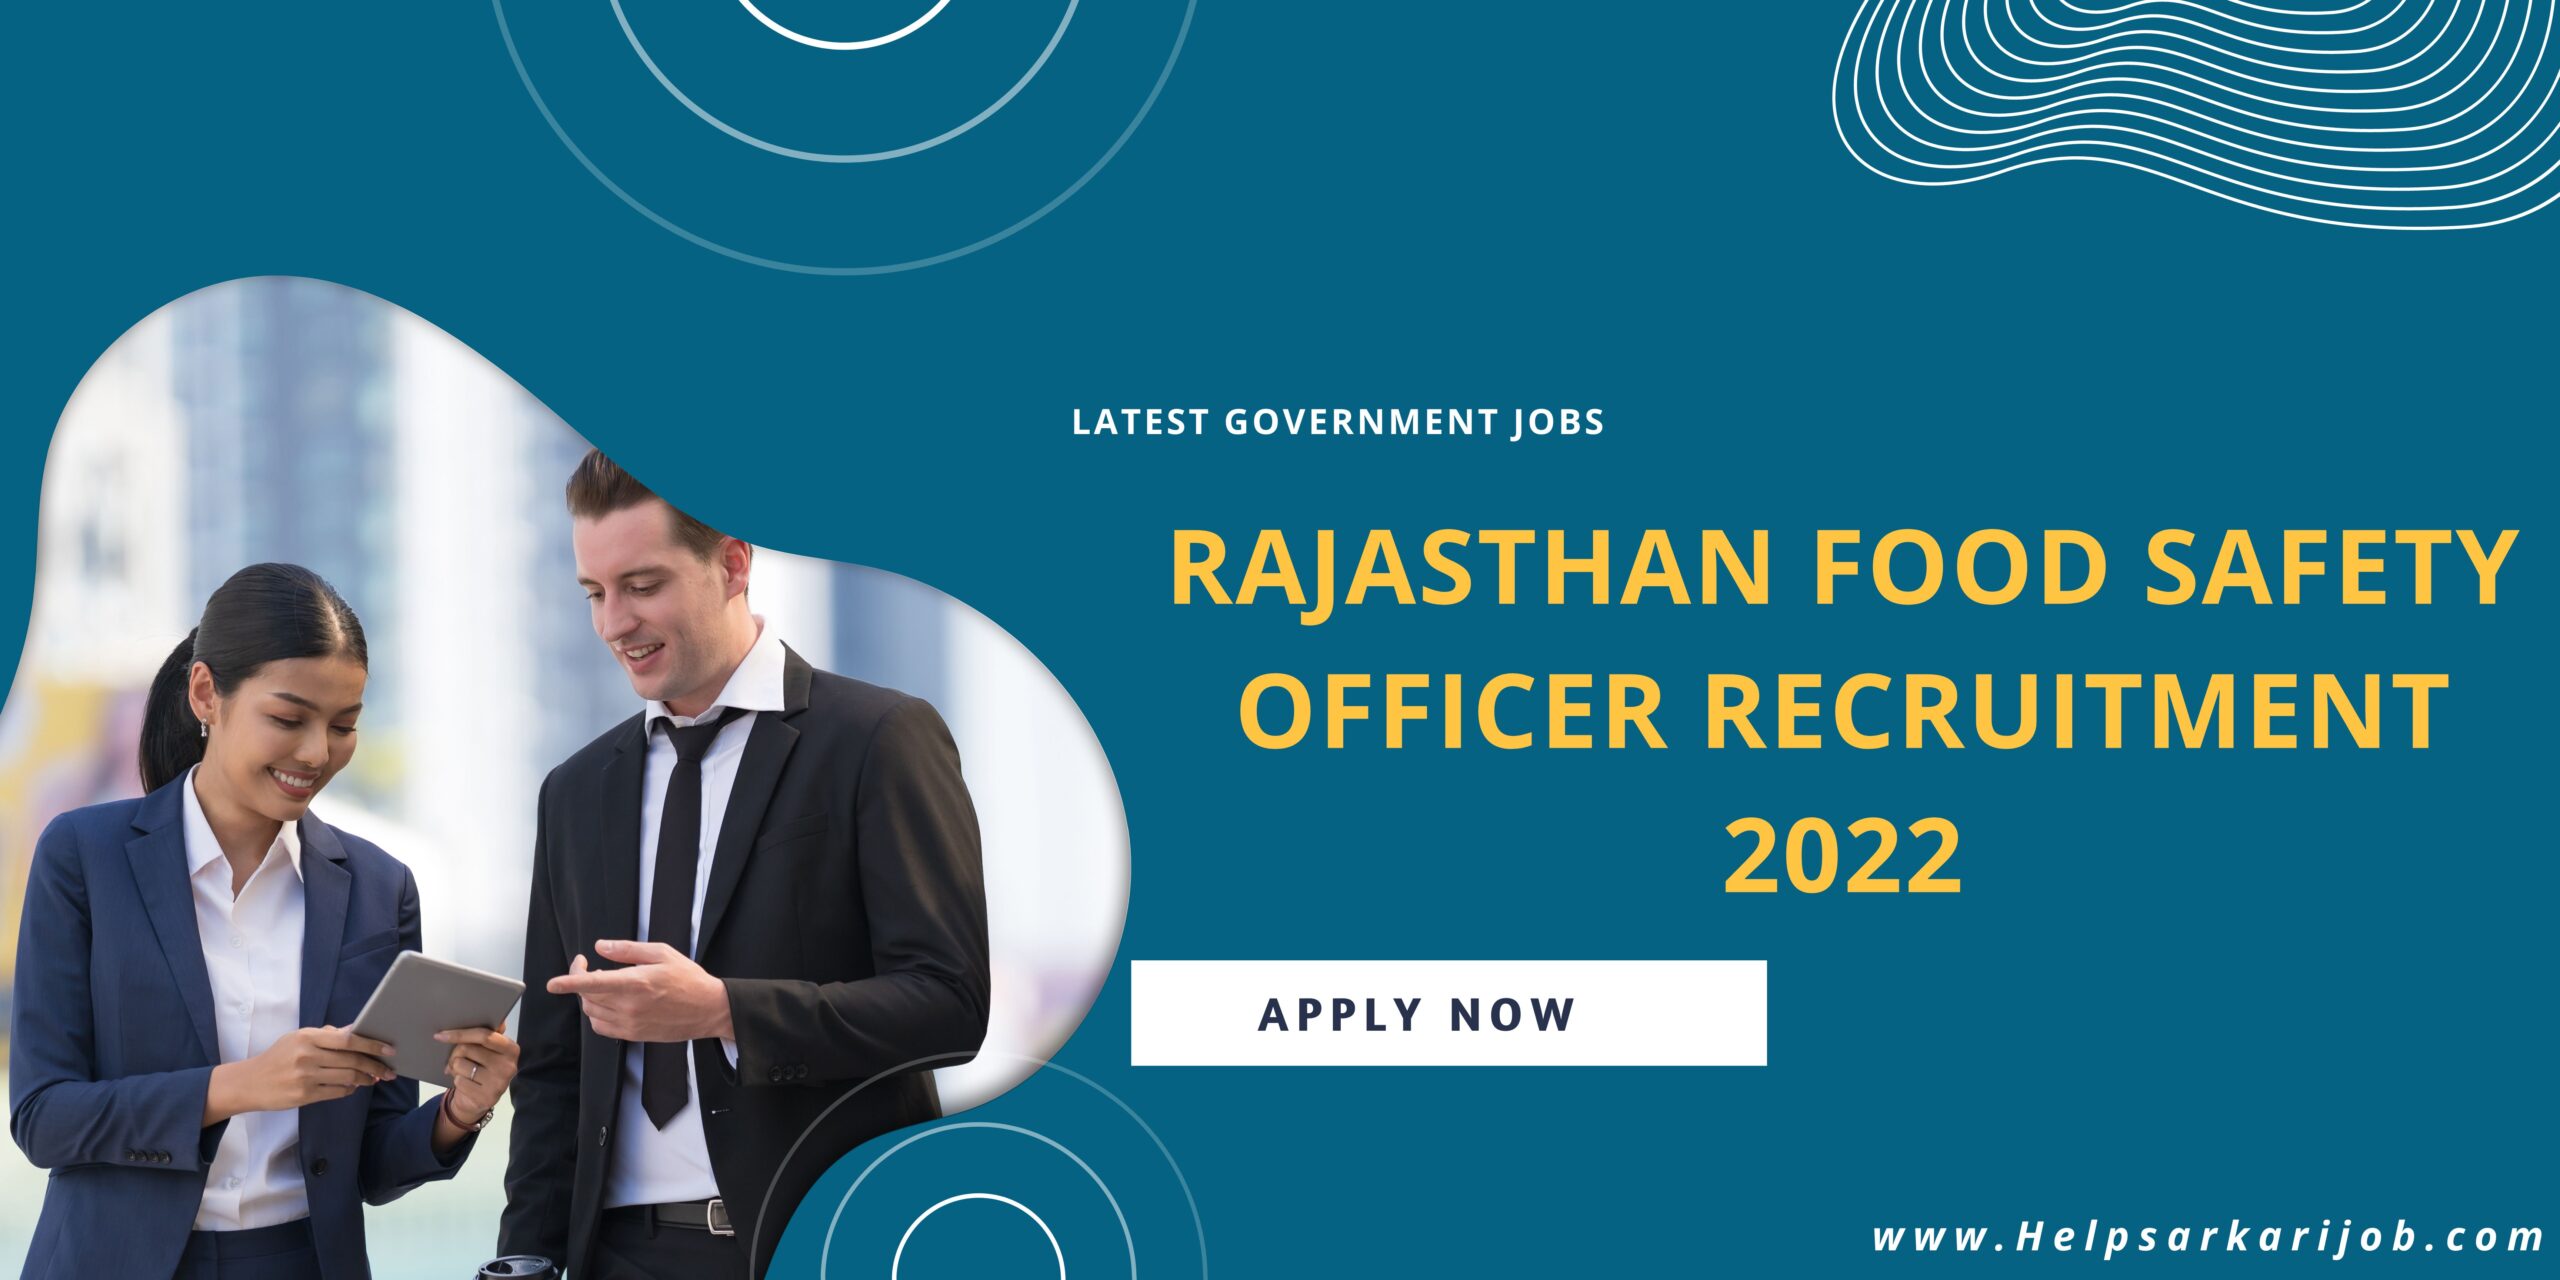 Rajasthan Food Safety Officer Recruitment 2022